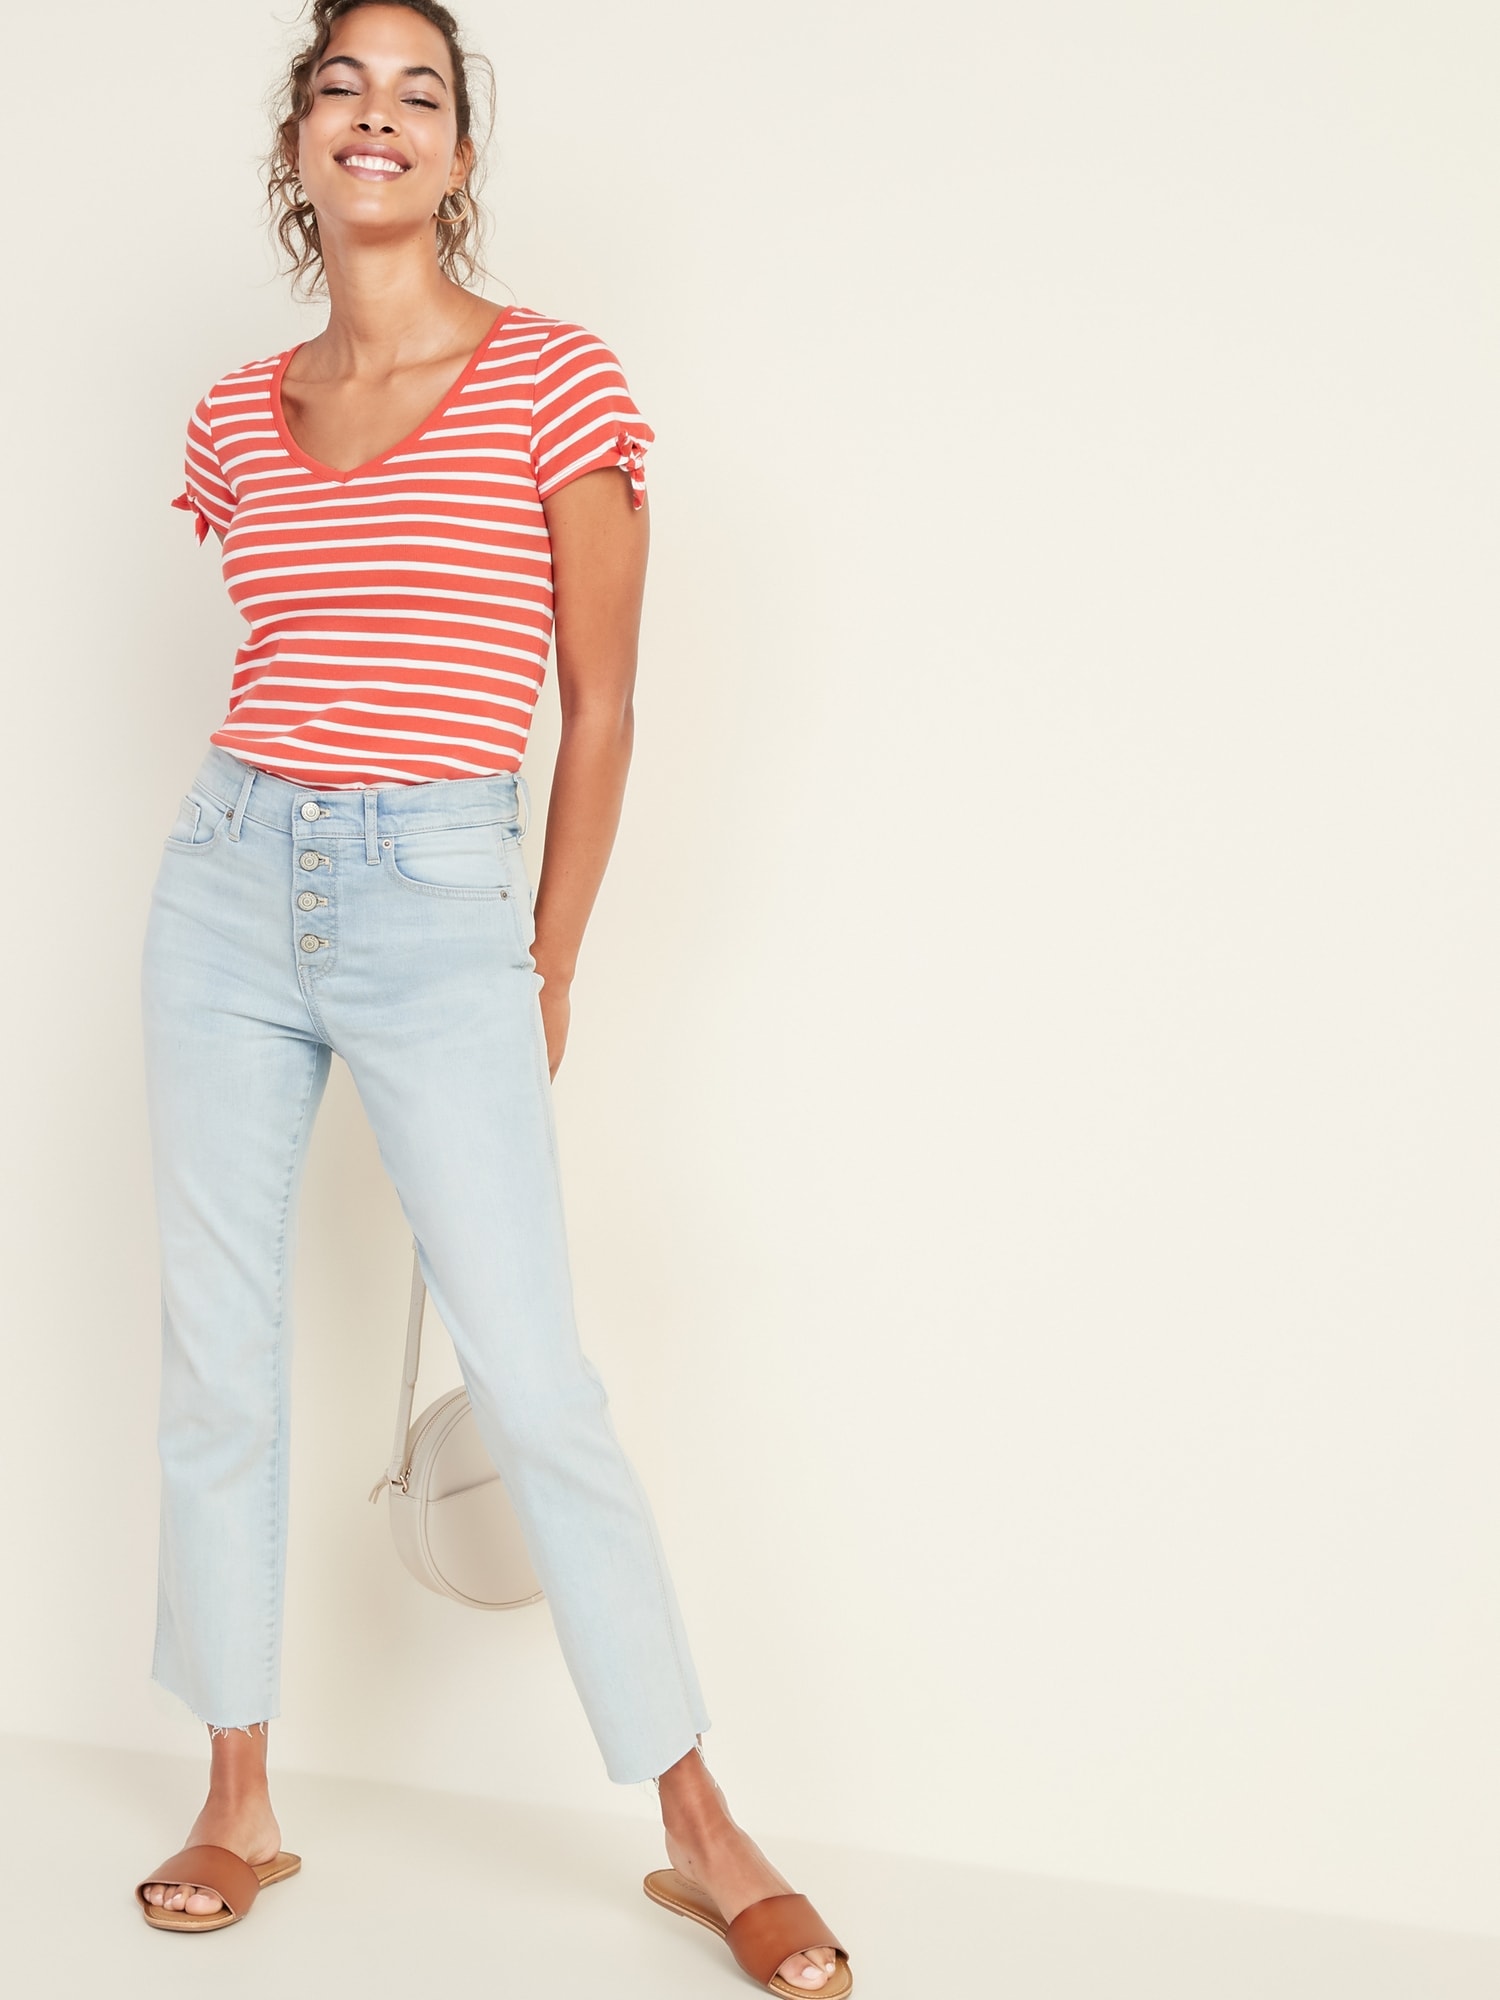 button fly flare jeans womens